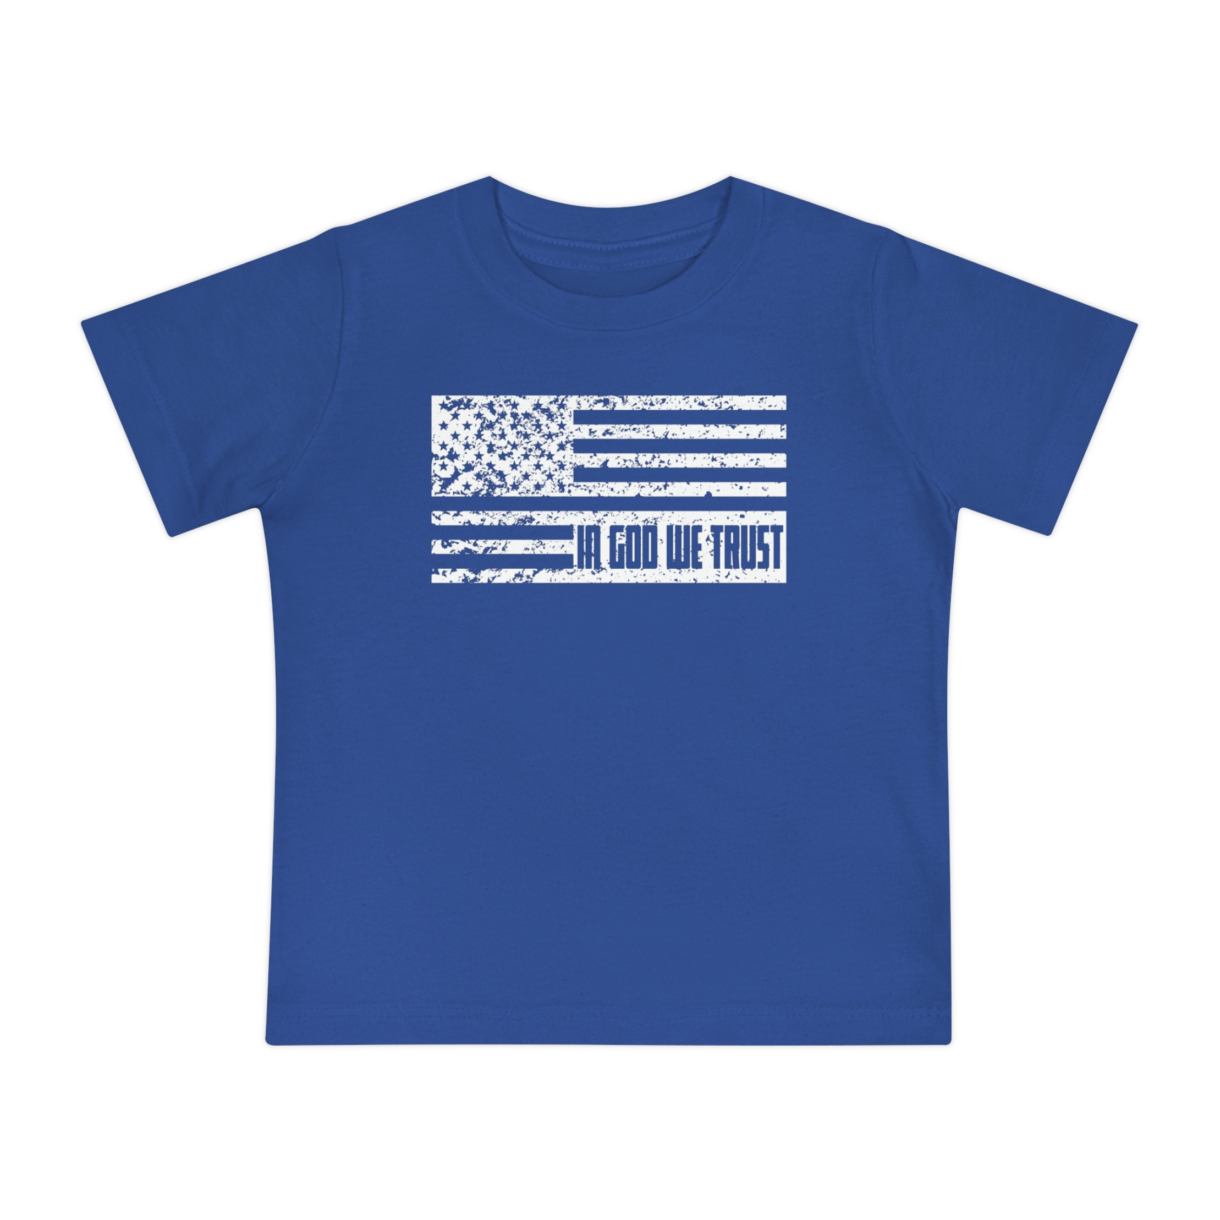 blue flag baby tee with in god we trust in flag